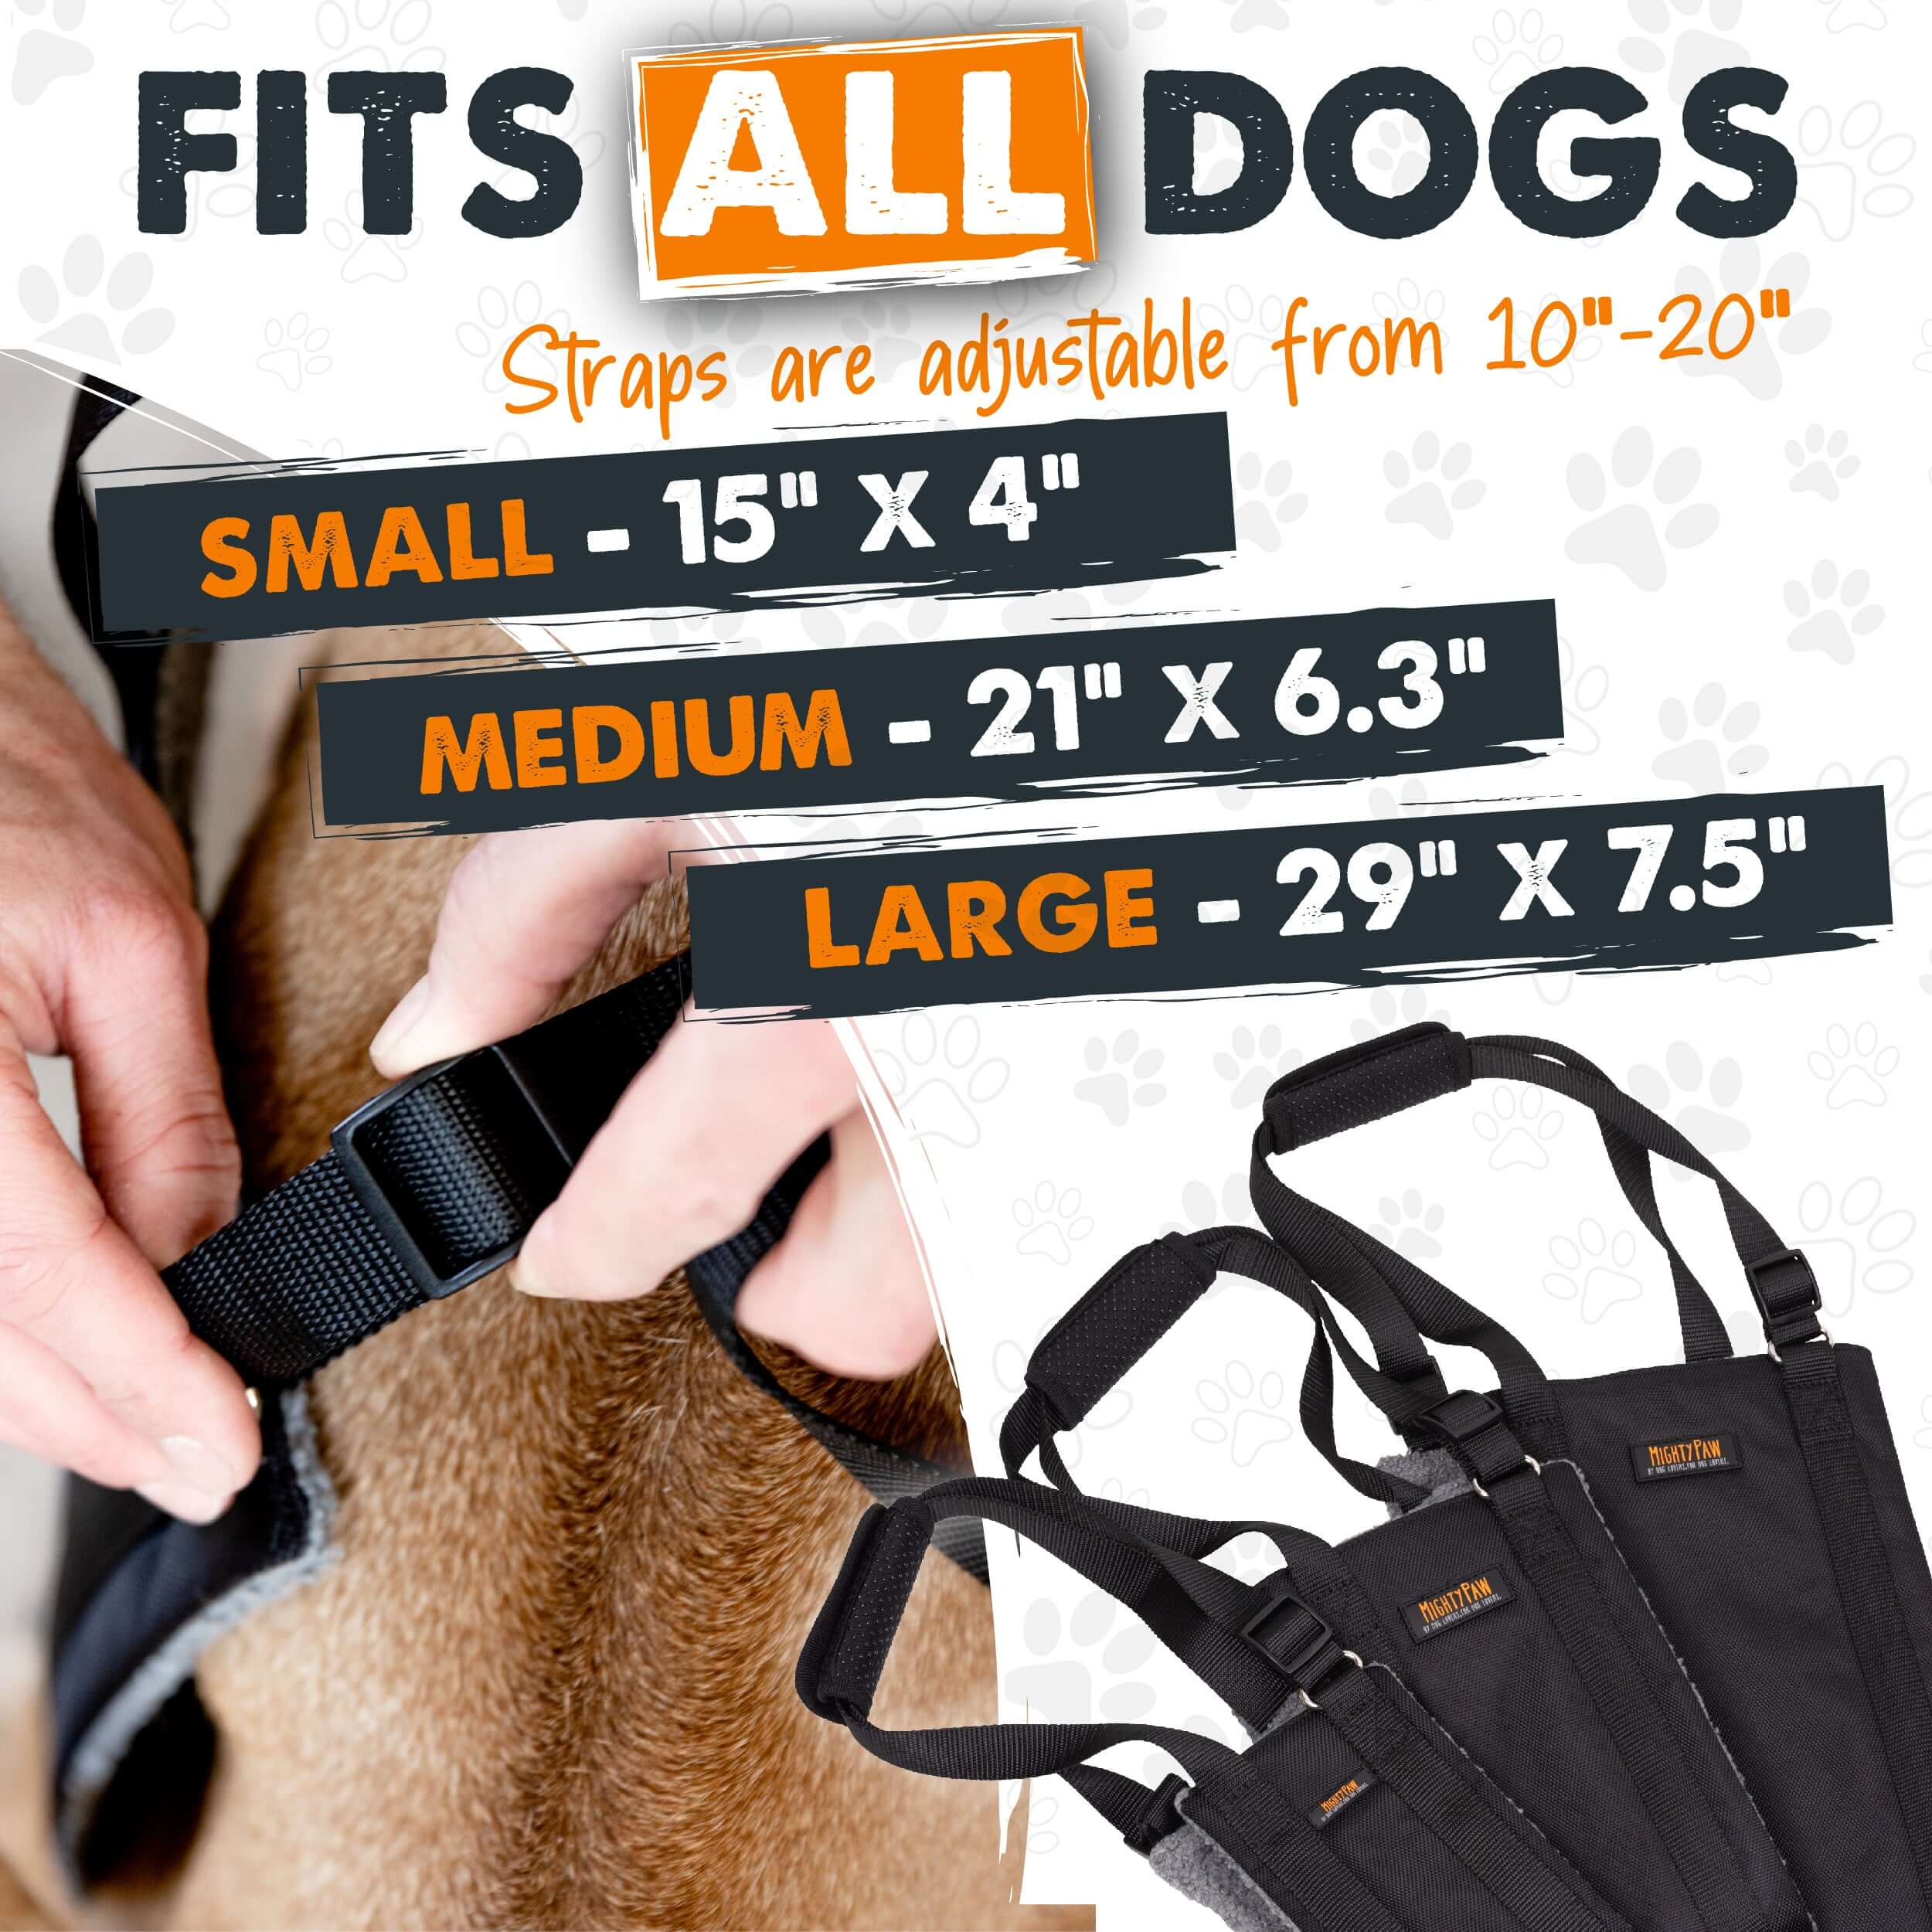 Lift Your Dog with Ease: Mighty Paw Dog Lift Harness for Hind Leg Support